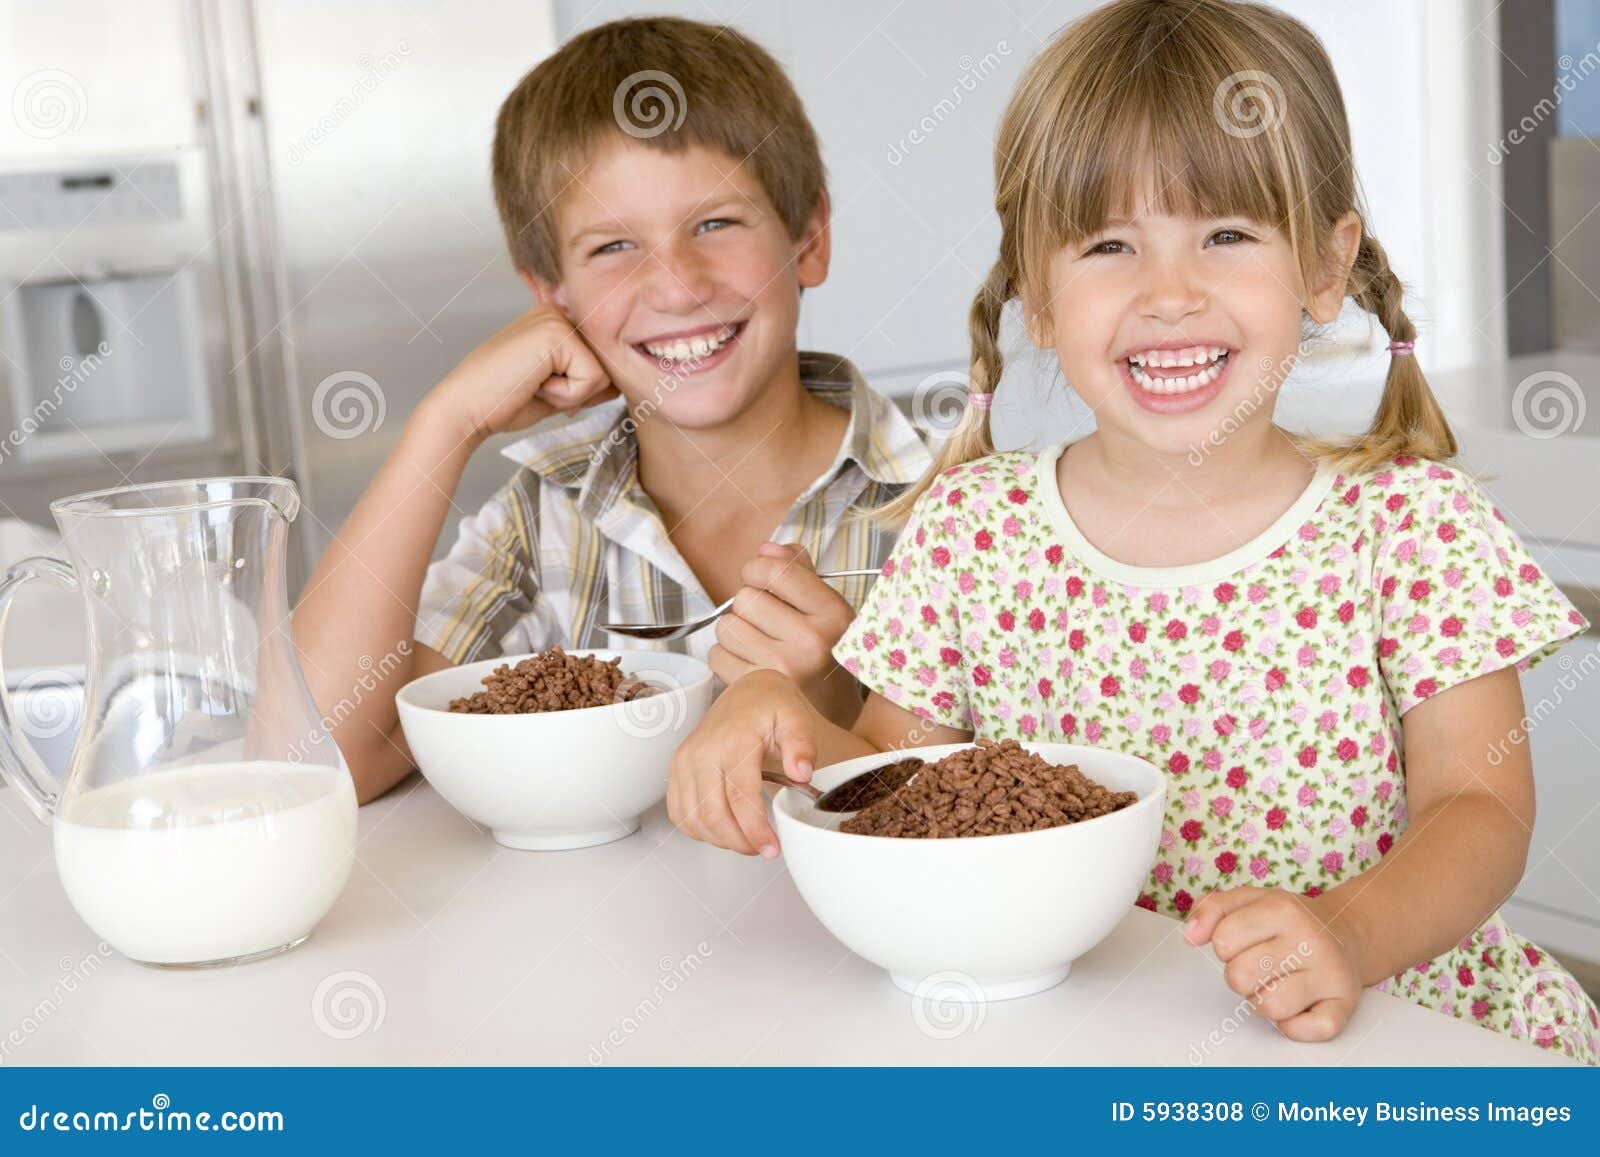 group of kids eating cereal